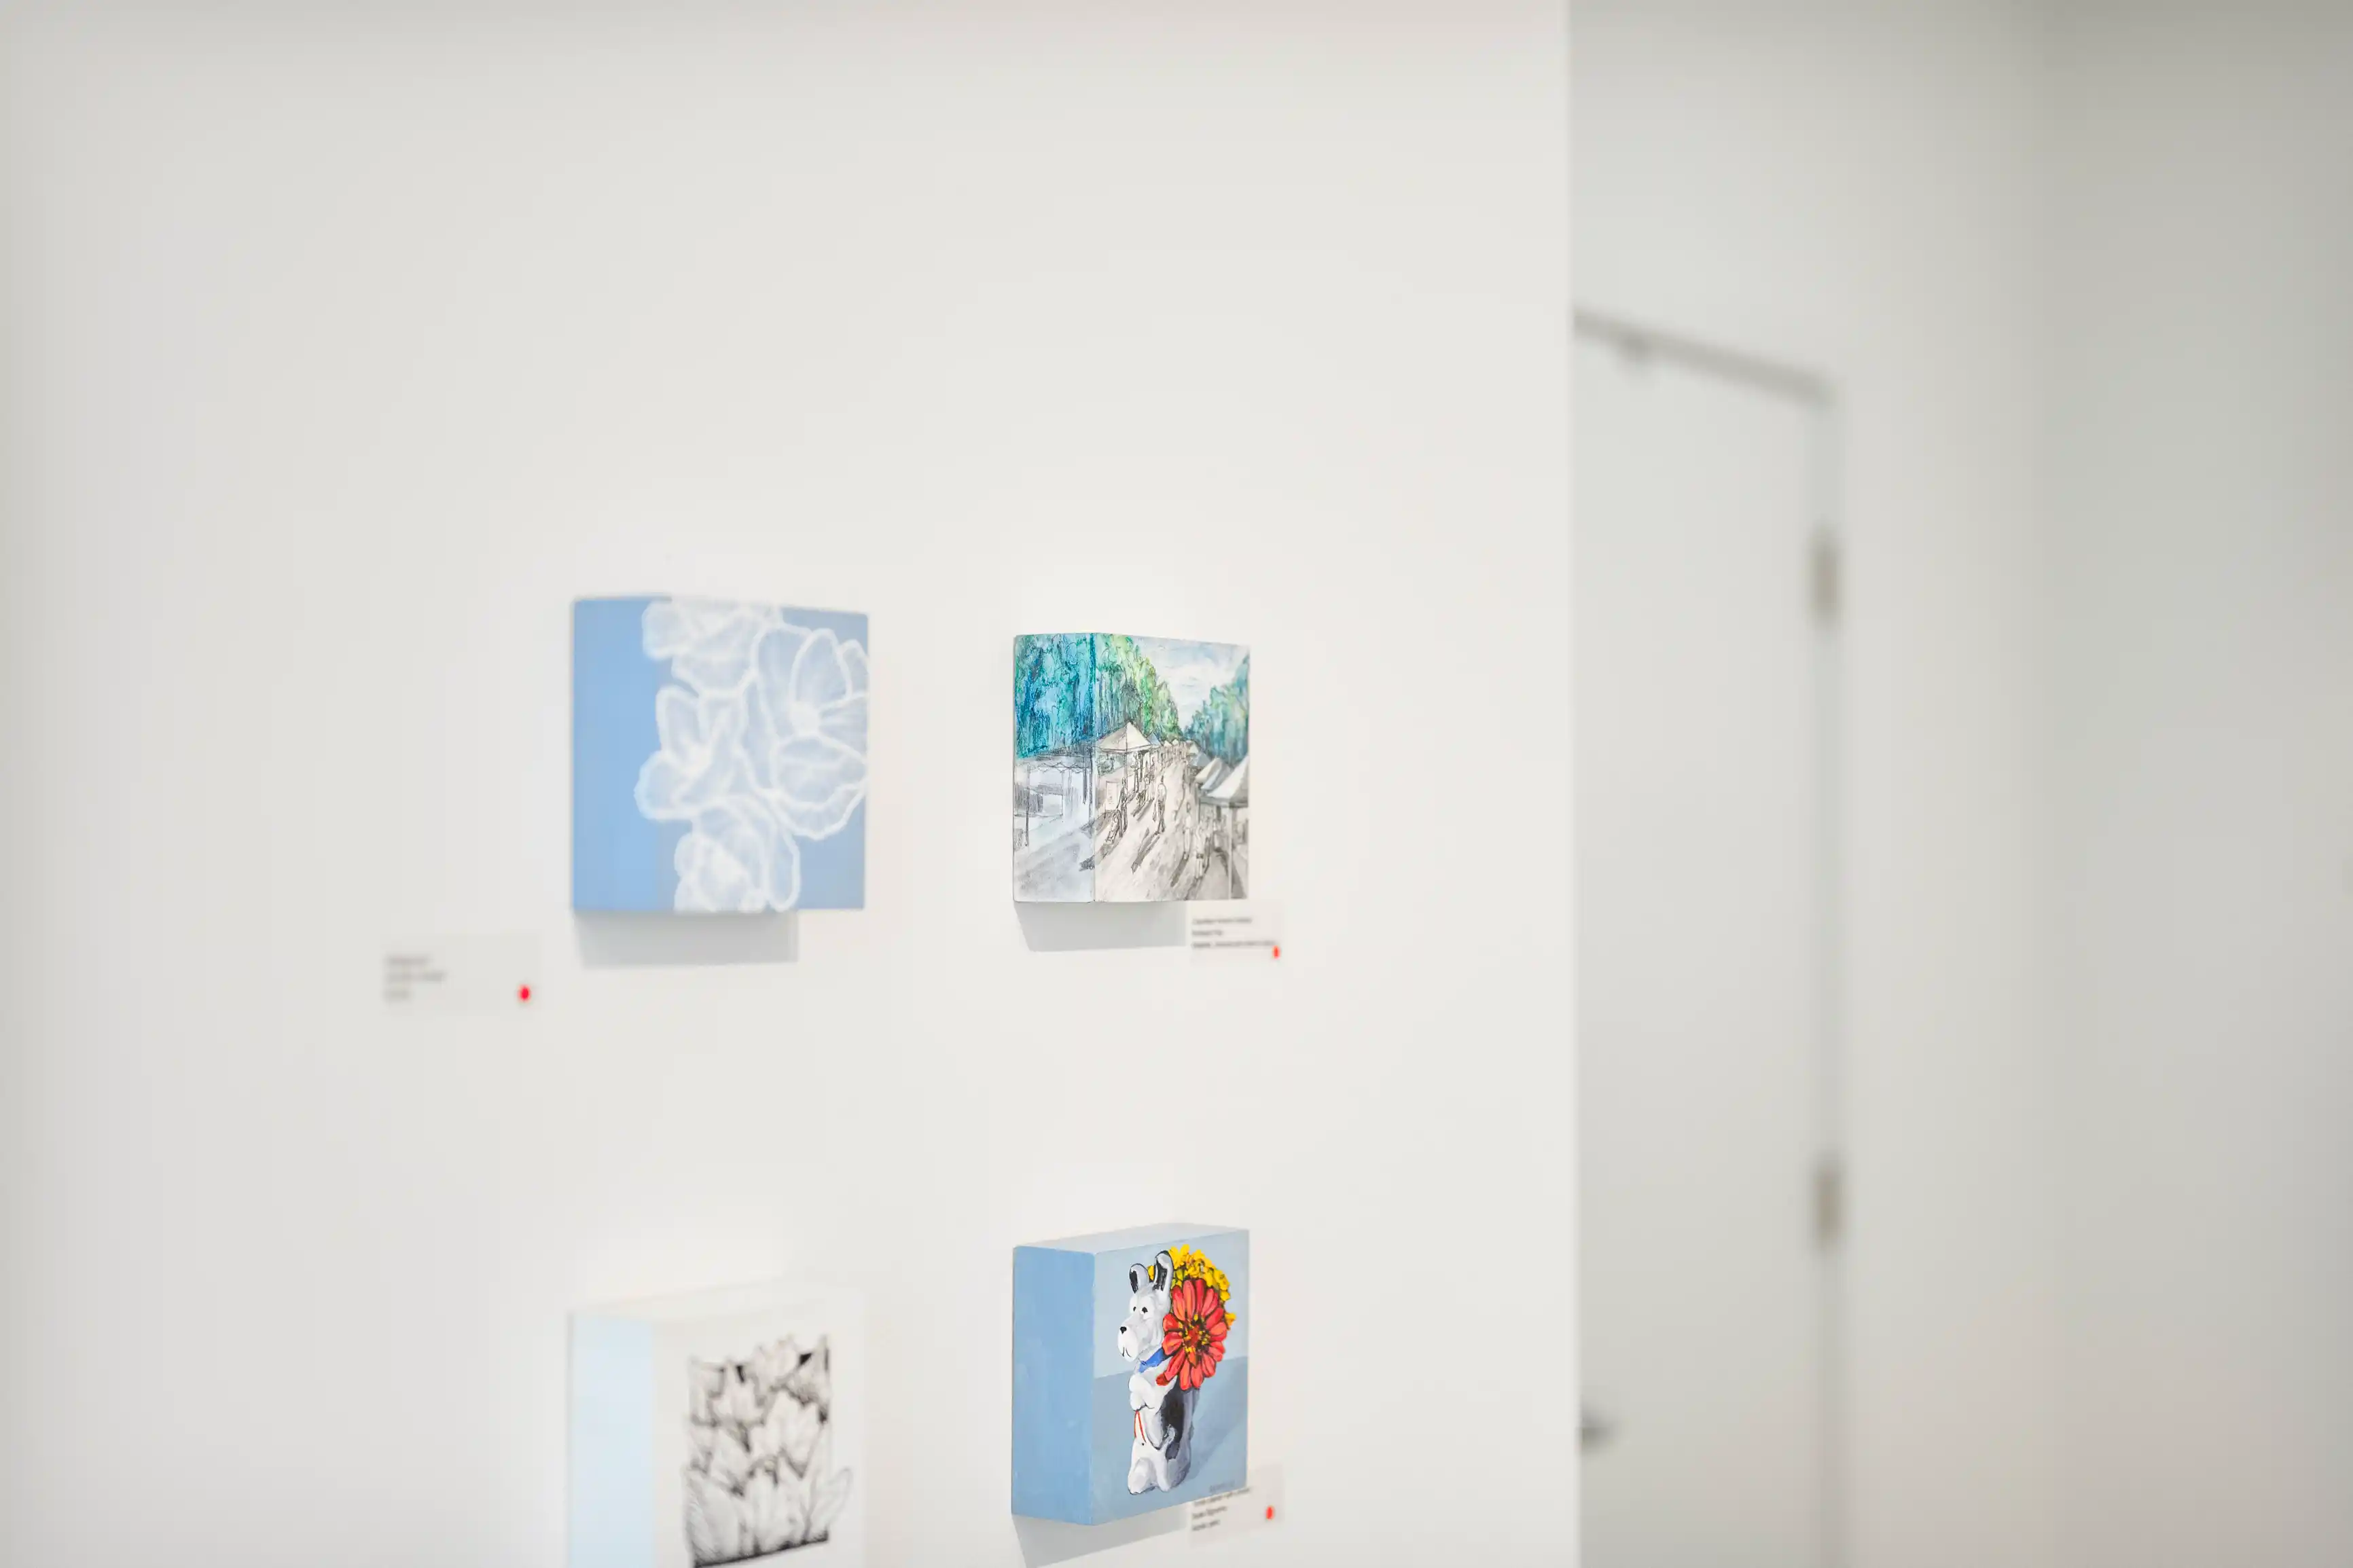 Three square canvases displayed on a white gallery wall, each with different artwork, with the focus on the vibrant painting of a cartoon dog holding a flower in its mouth.